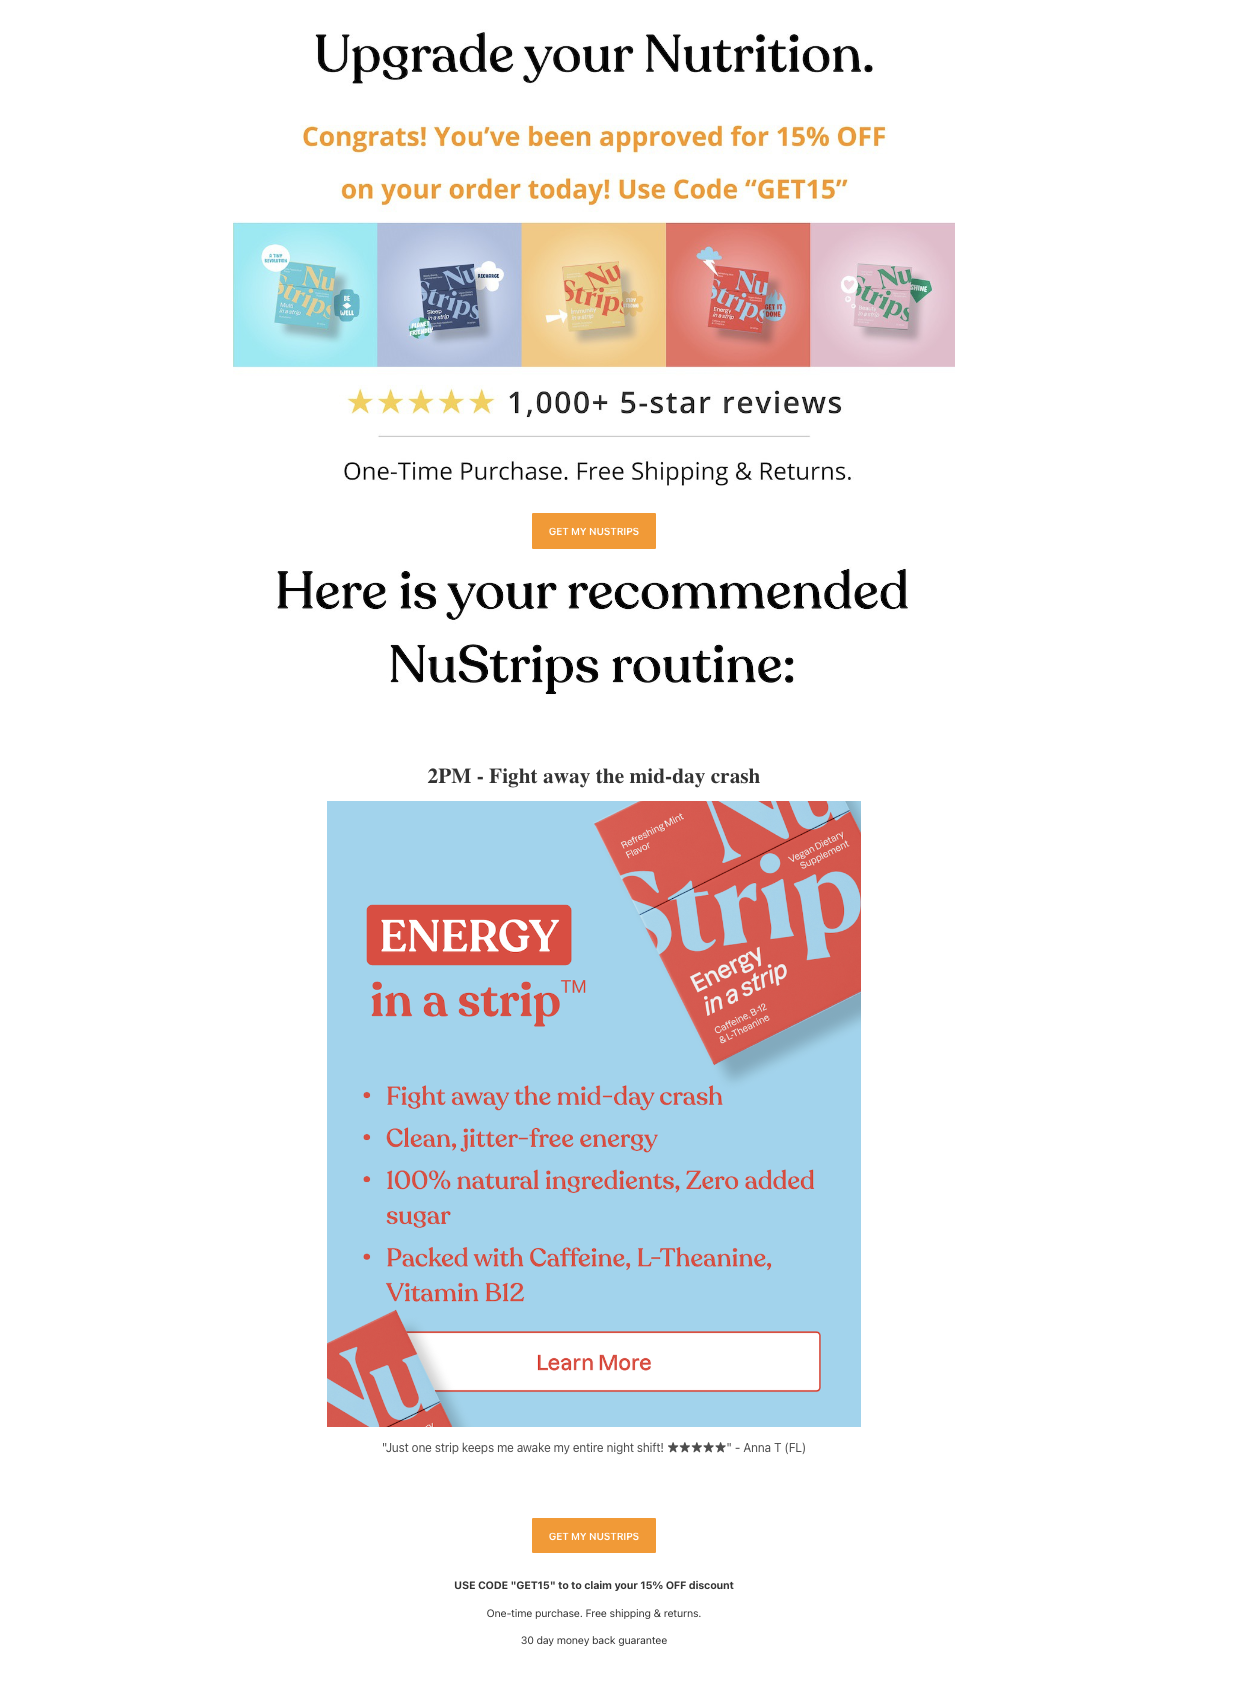 nustrips - recommendation page